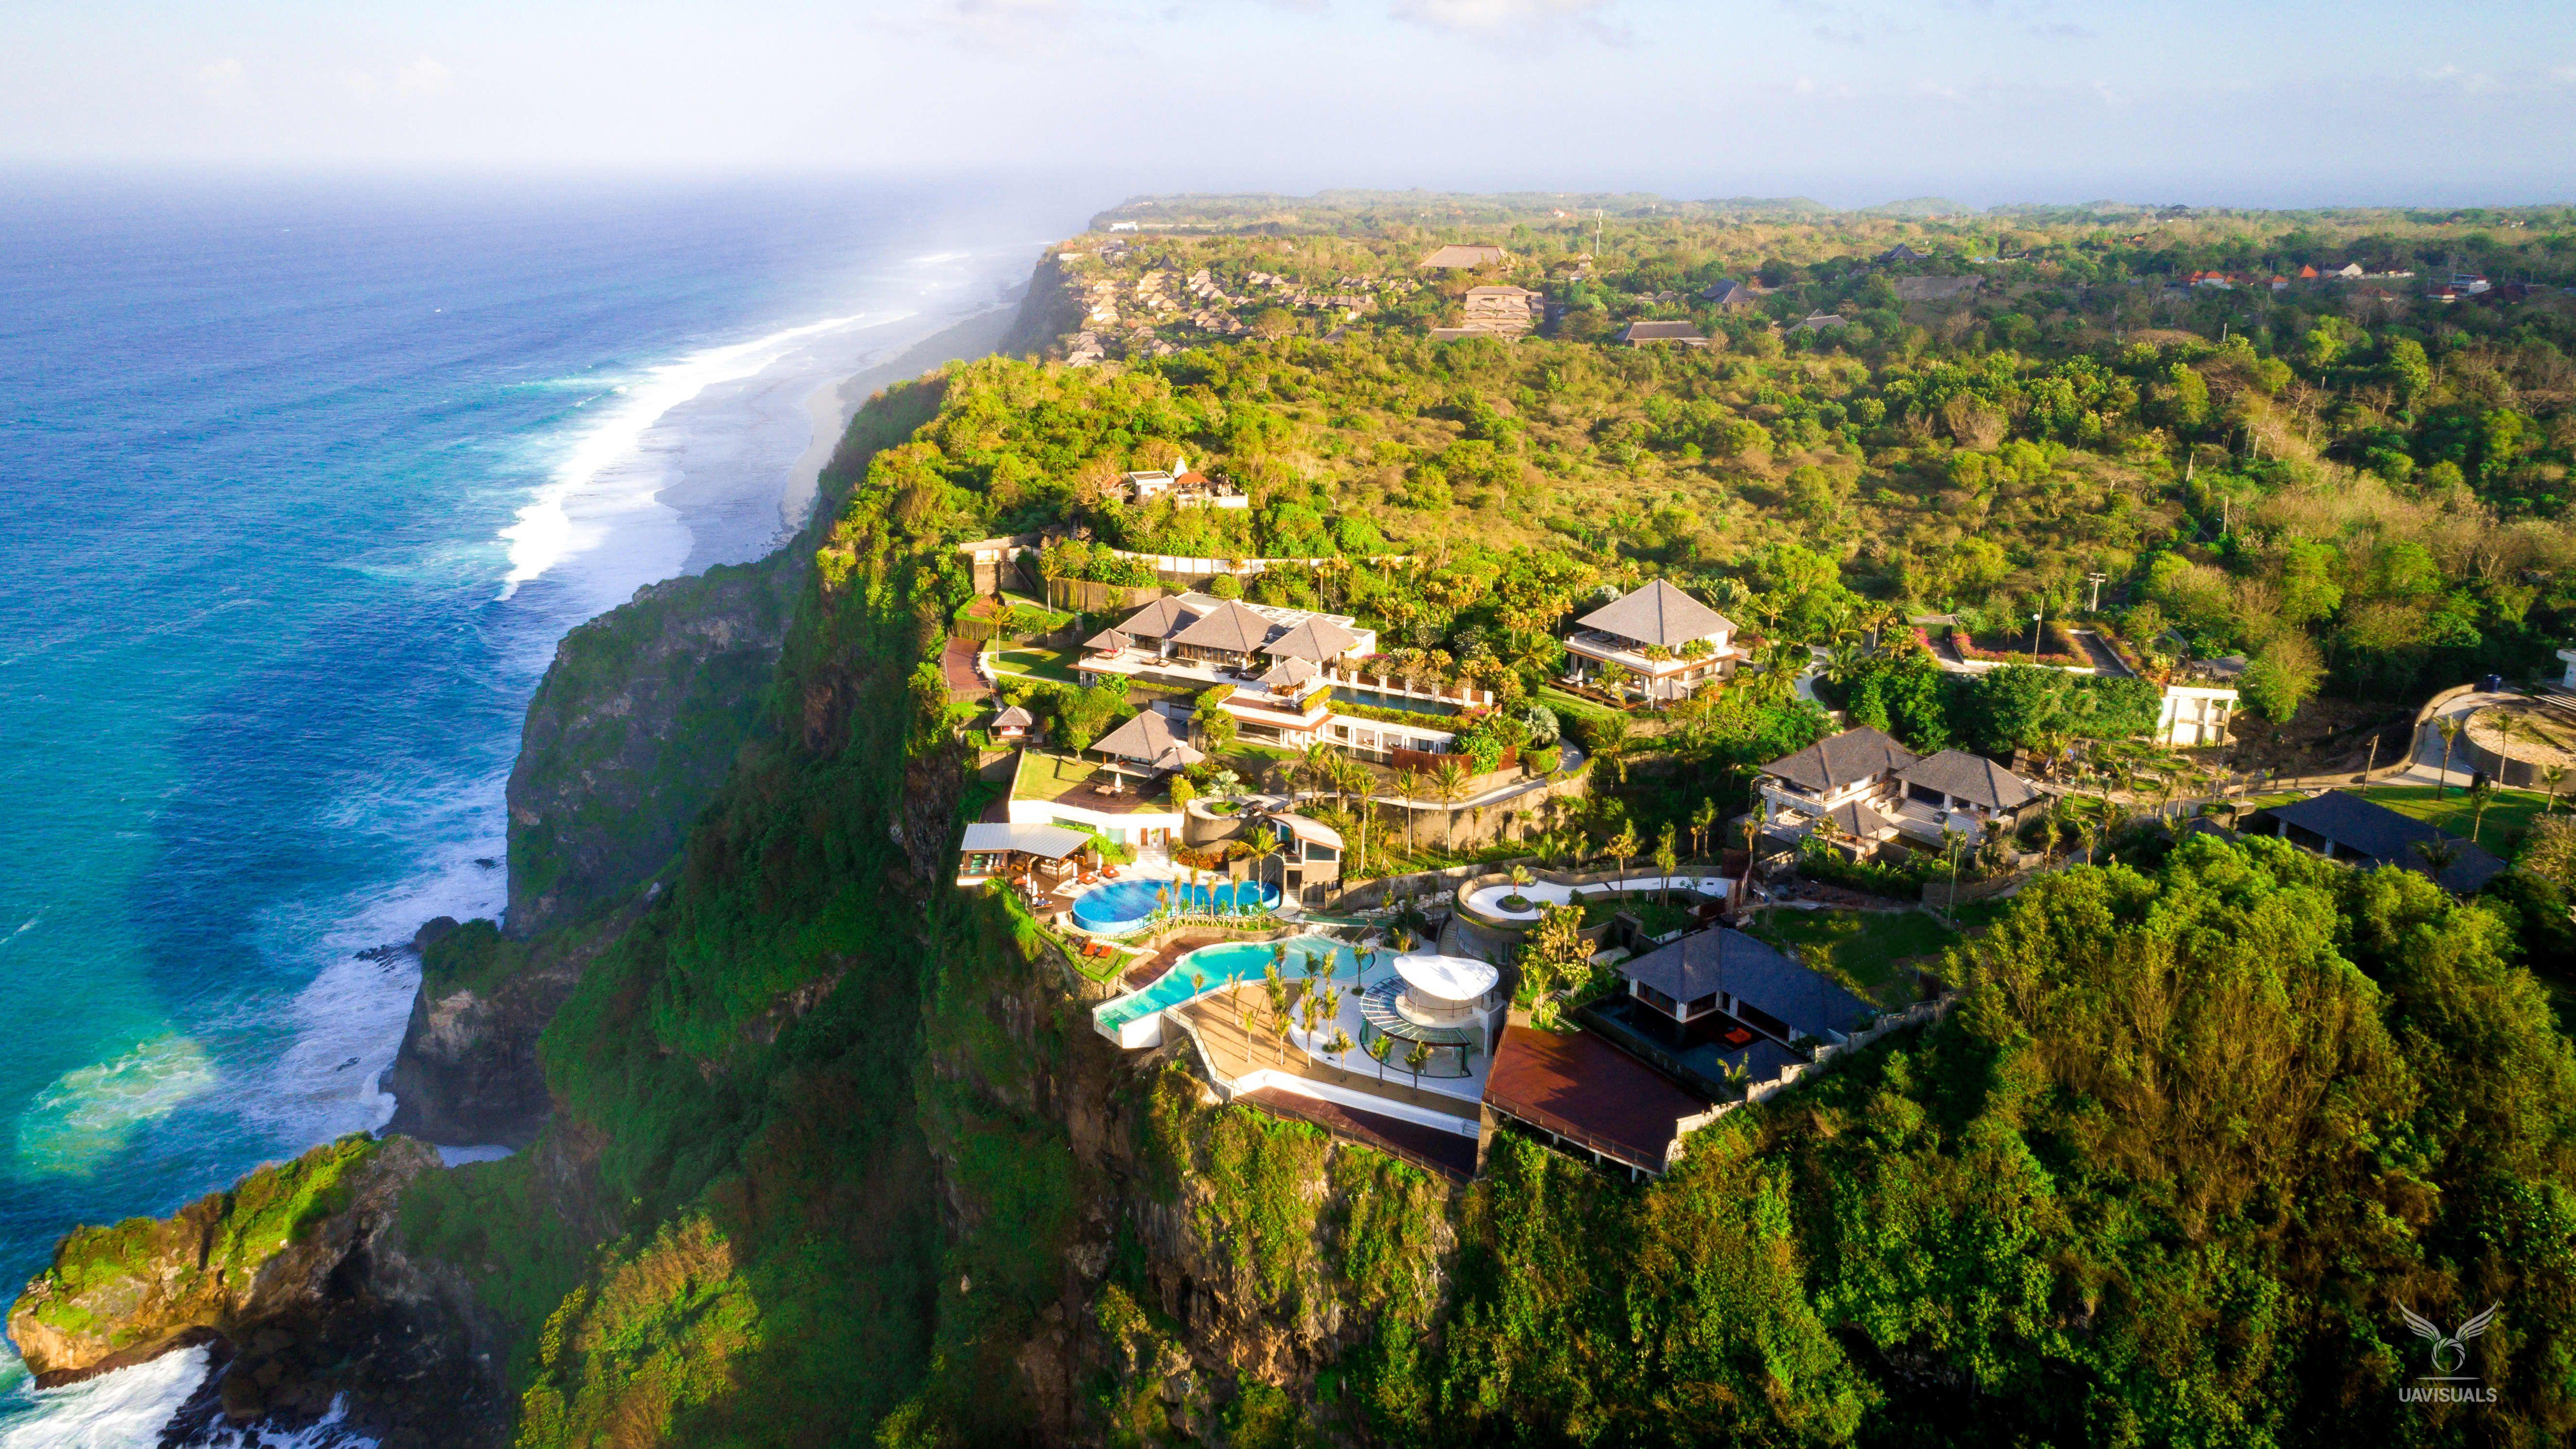 Bali Villa Luxury with Glass-Bottom Cliffside Pool, Daily Dining